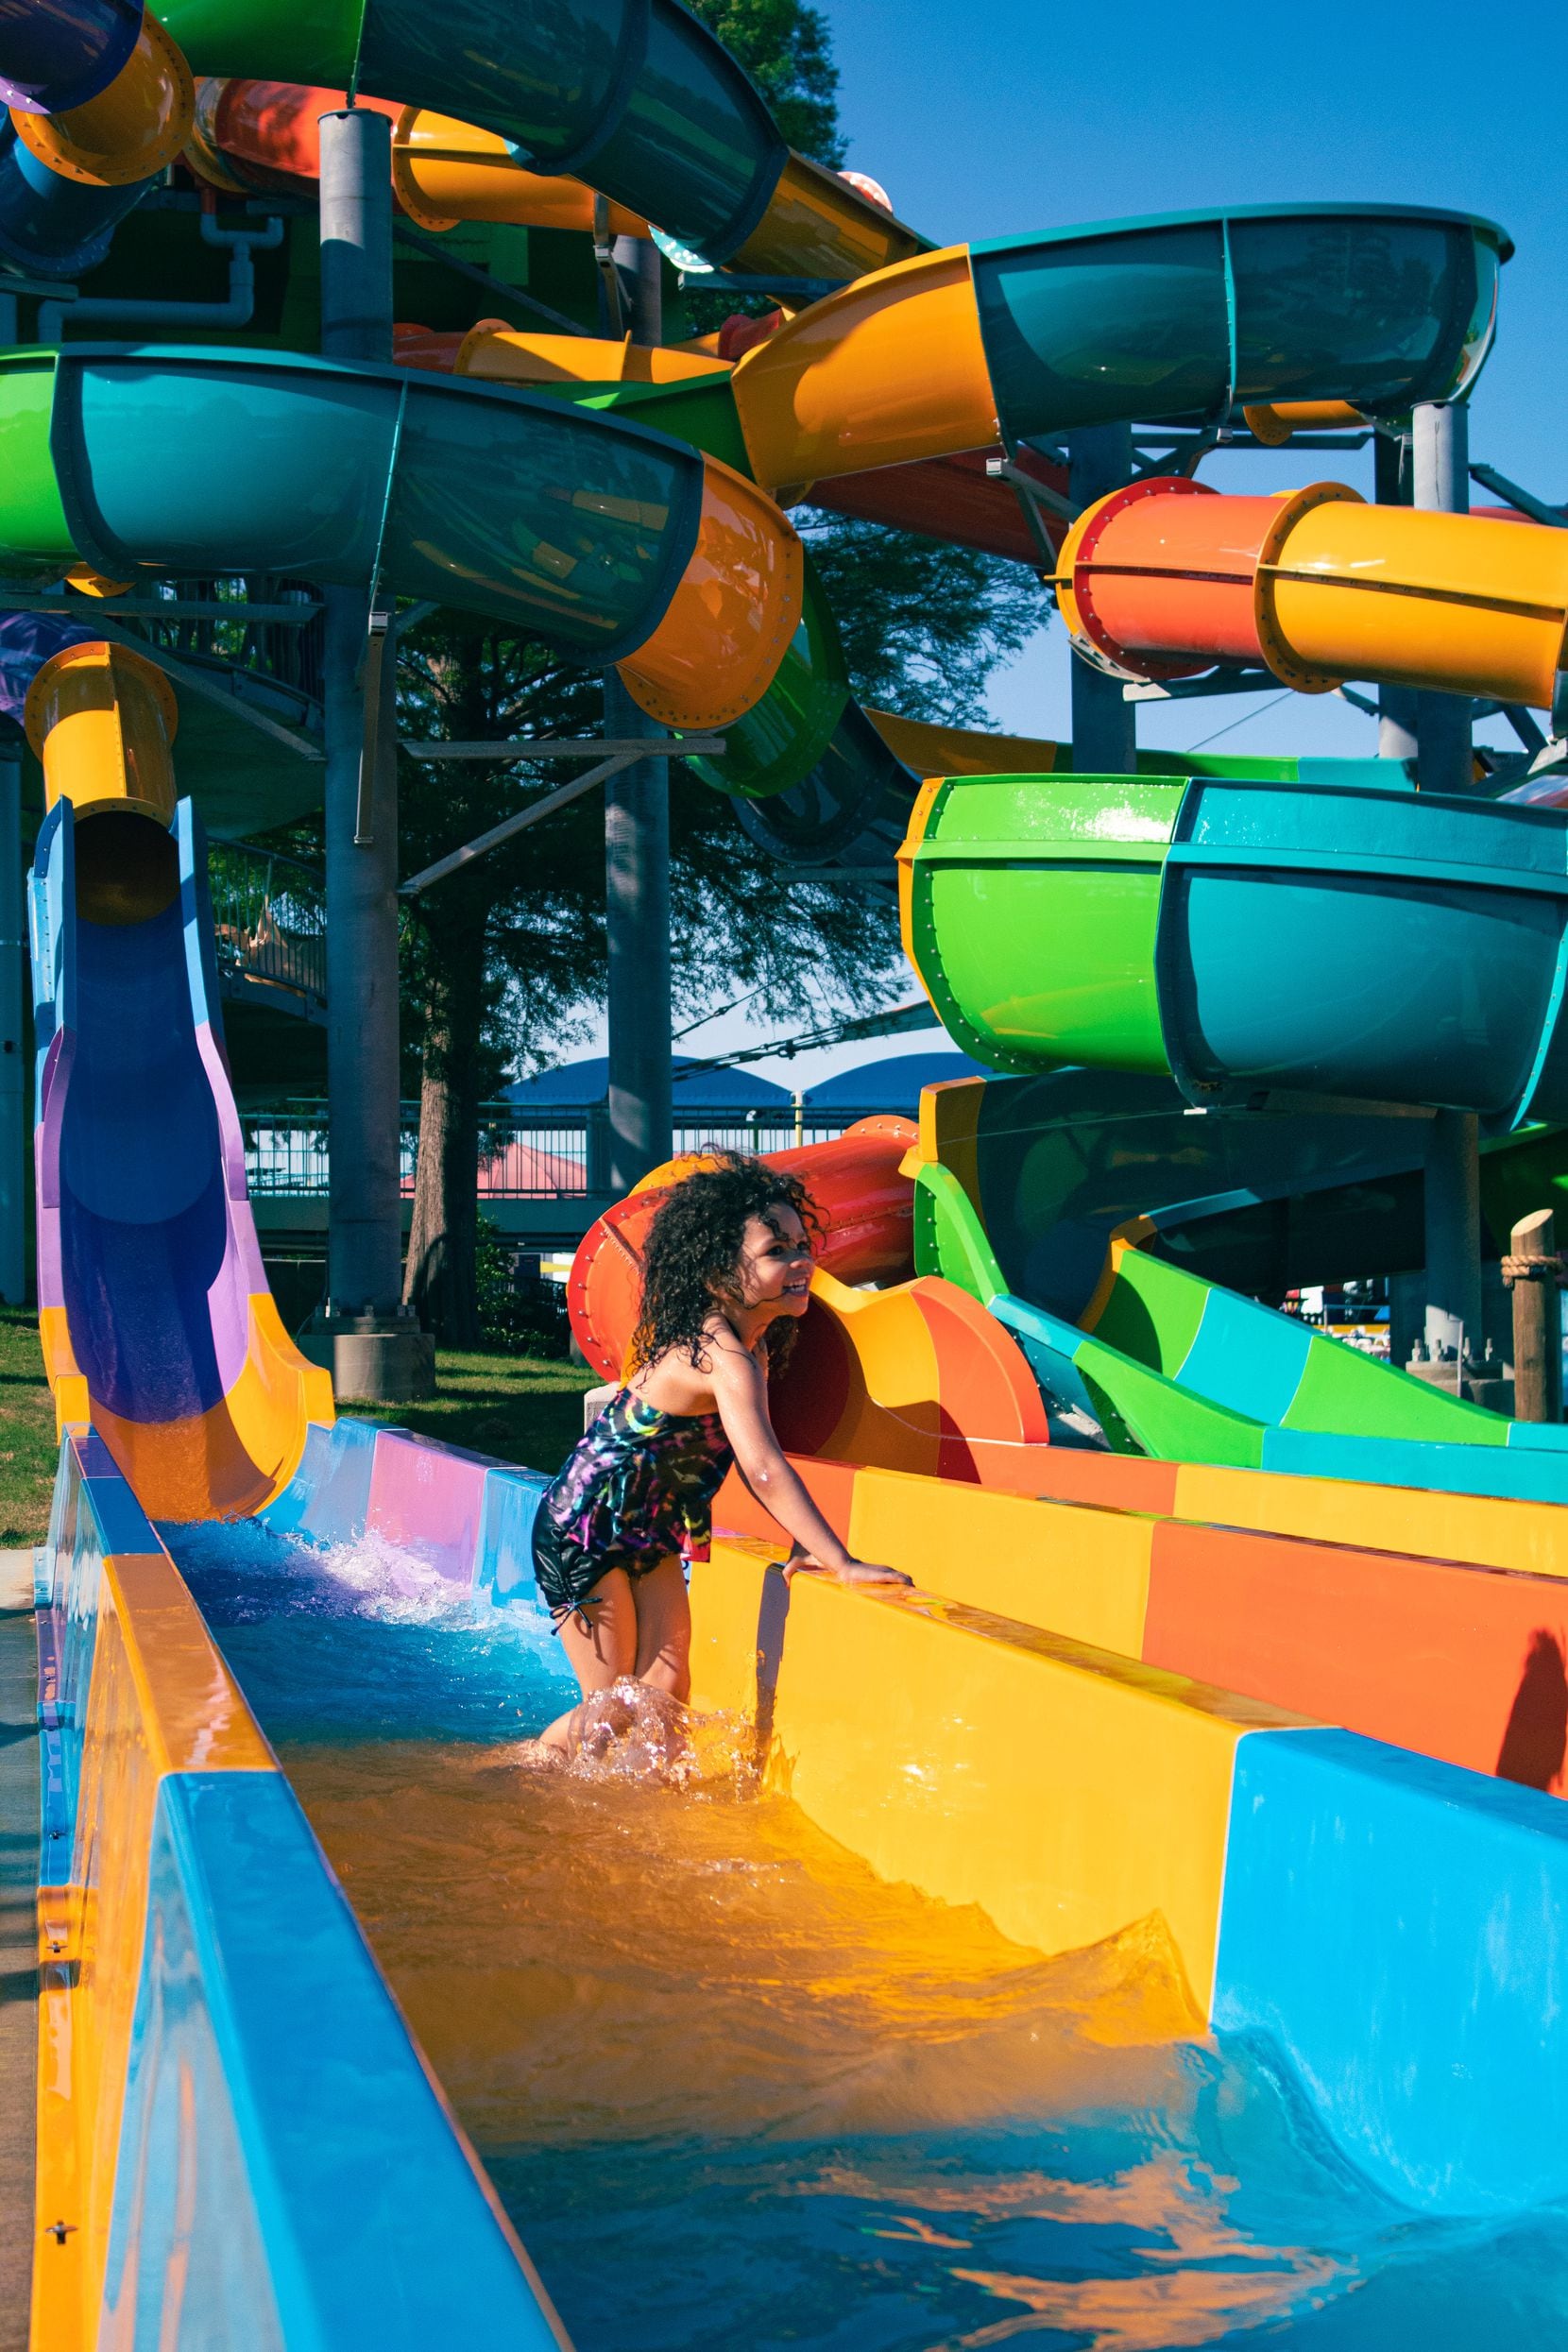 The Banzai Pipeline at Six Flags Hurricane Harbor Arlington has three slides to twist, turn and spin riders.